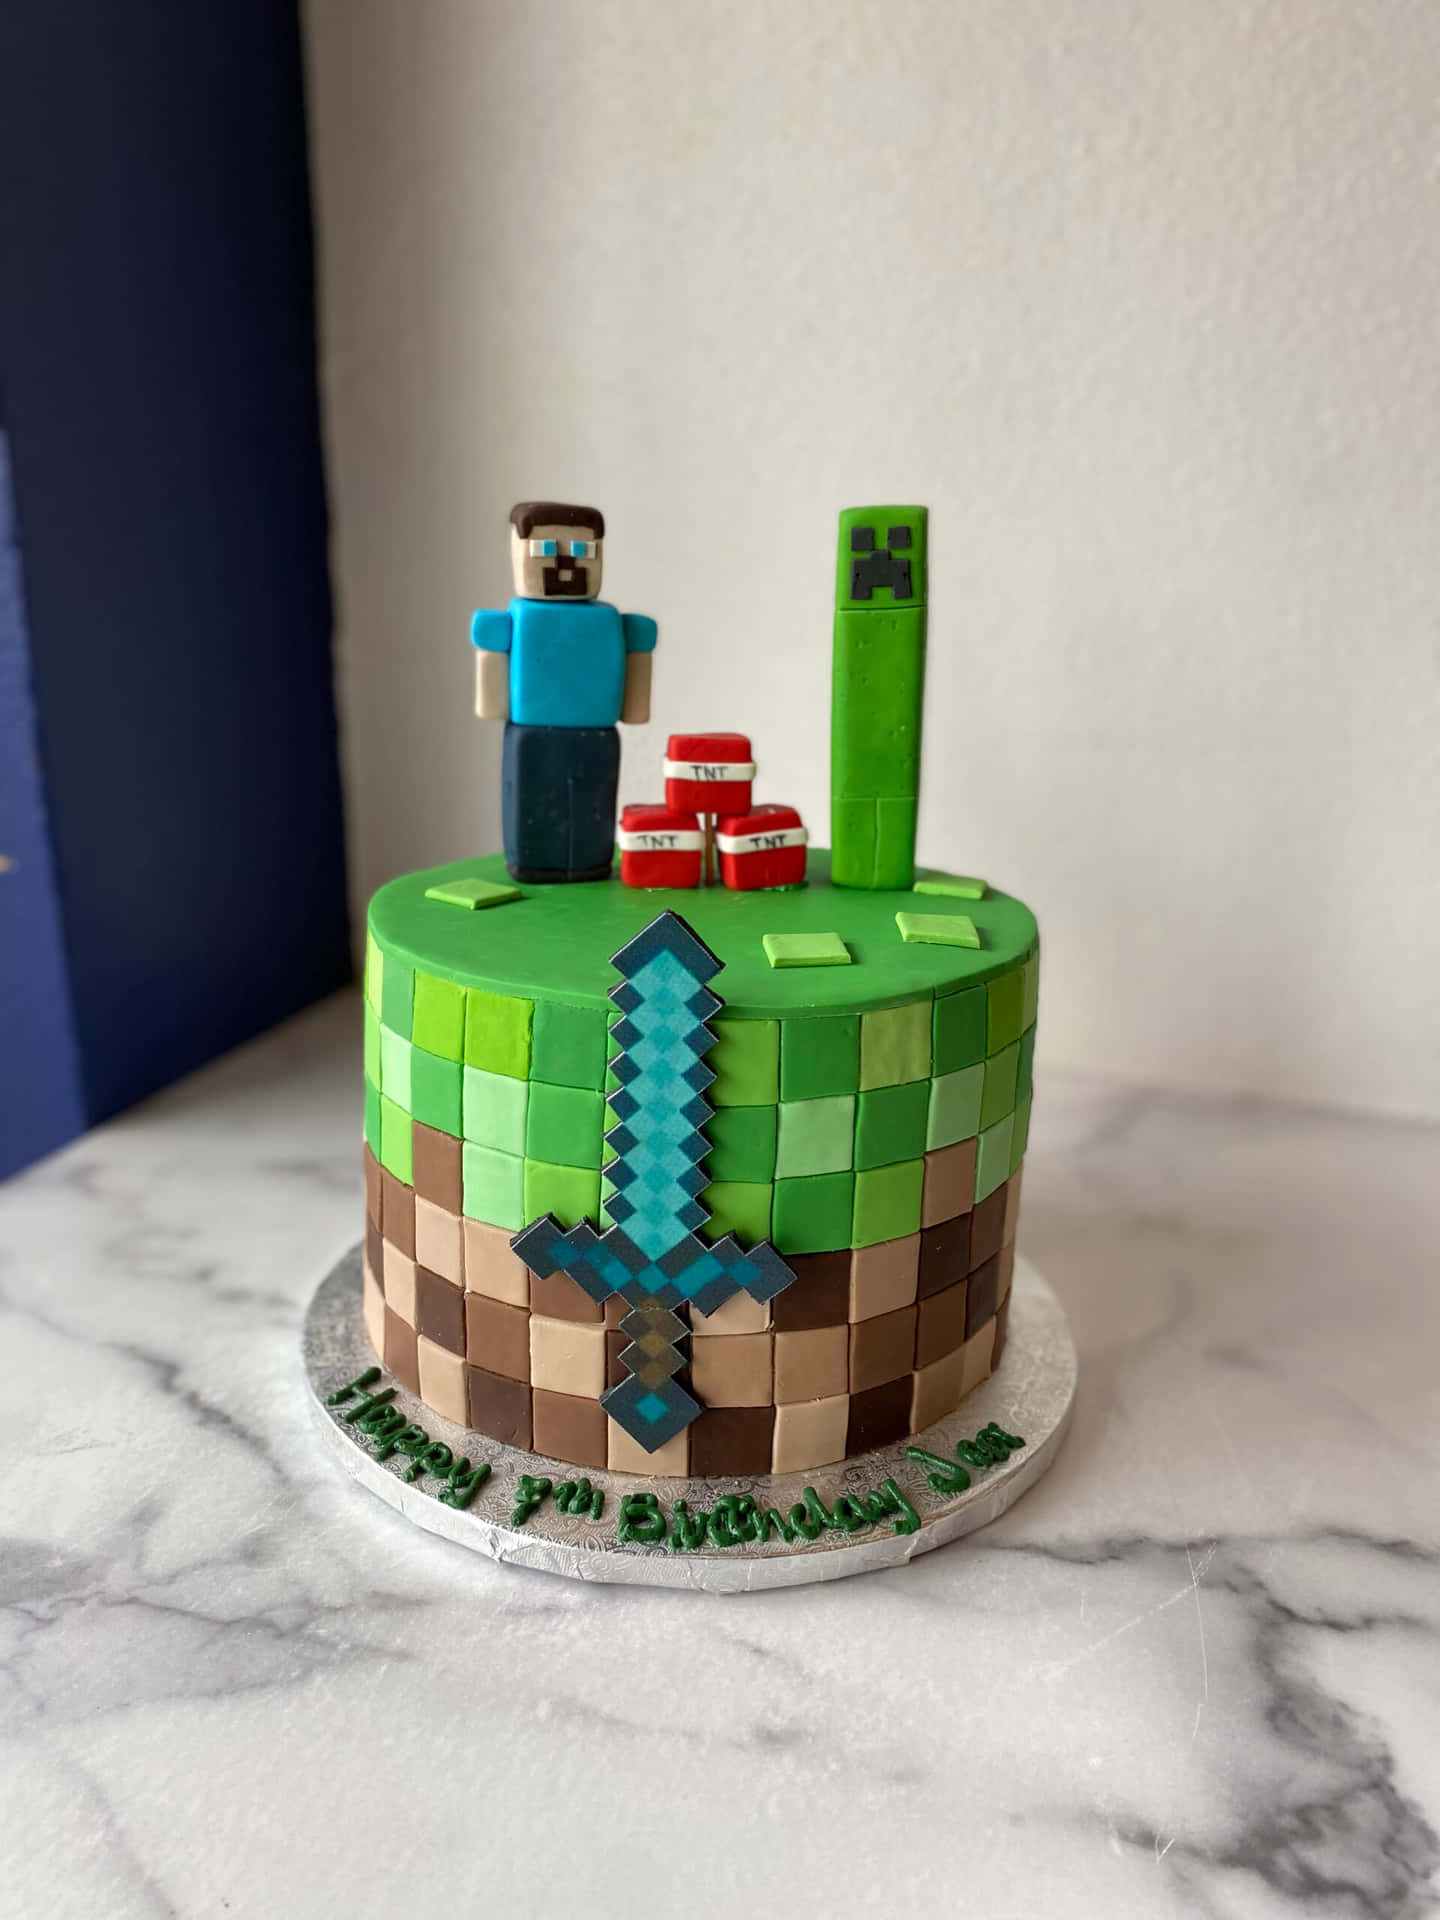 A Variety of Unique Minecraft Cakes to Brighten Any Event